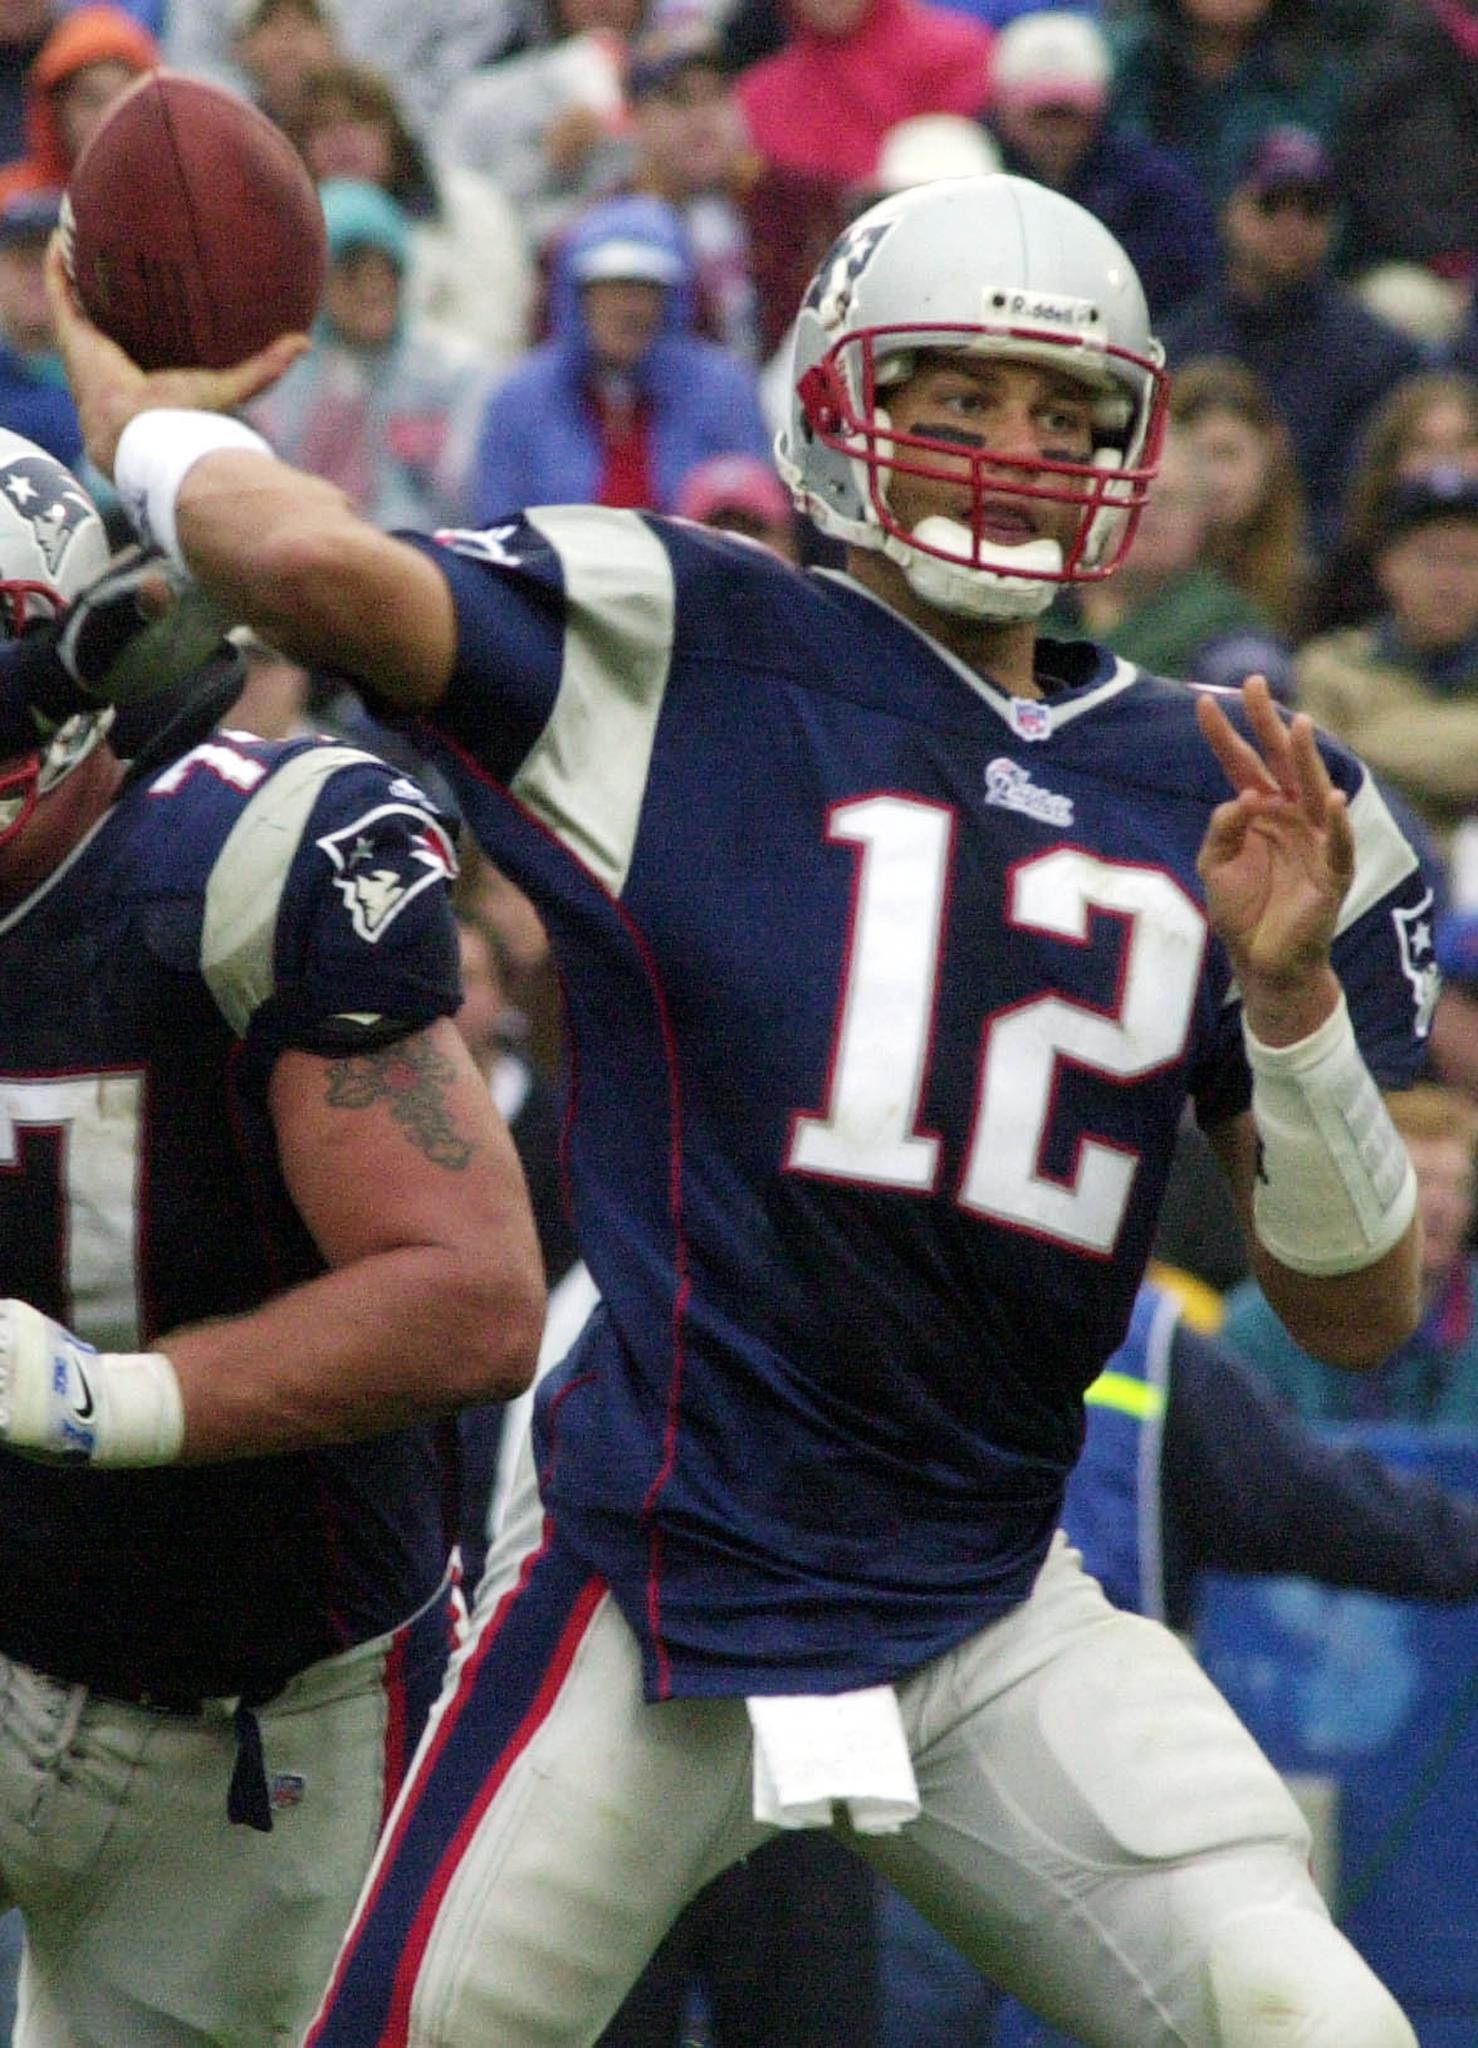 FOXBORO, UNITED STATES: The New England Patriots' quarterback Tom Brady passes against the San Diego Chargers in the forth quarter 14 October 2001 in Foxboro Stadium in Foxboro, Massachusetts. The Patriots won 29-26 in over time. JOHN MOTTERN/AFP via Getty Images